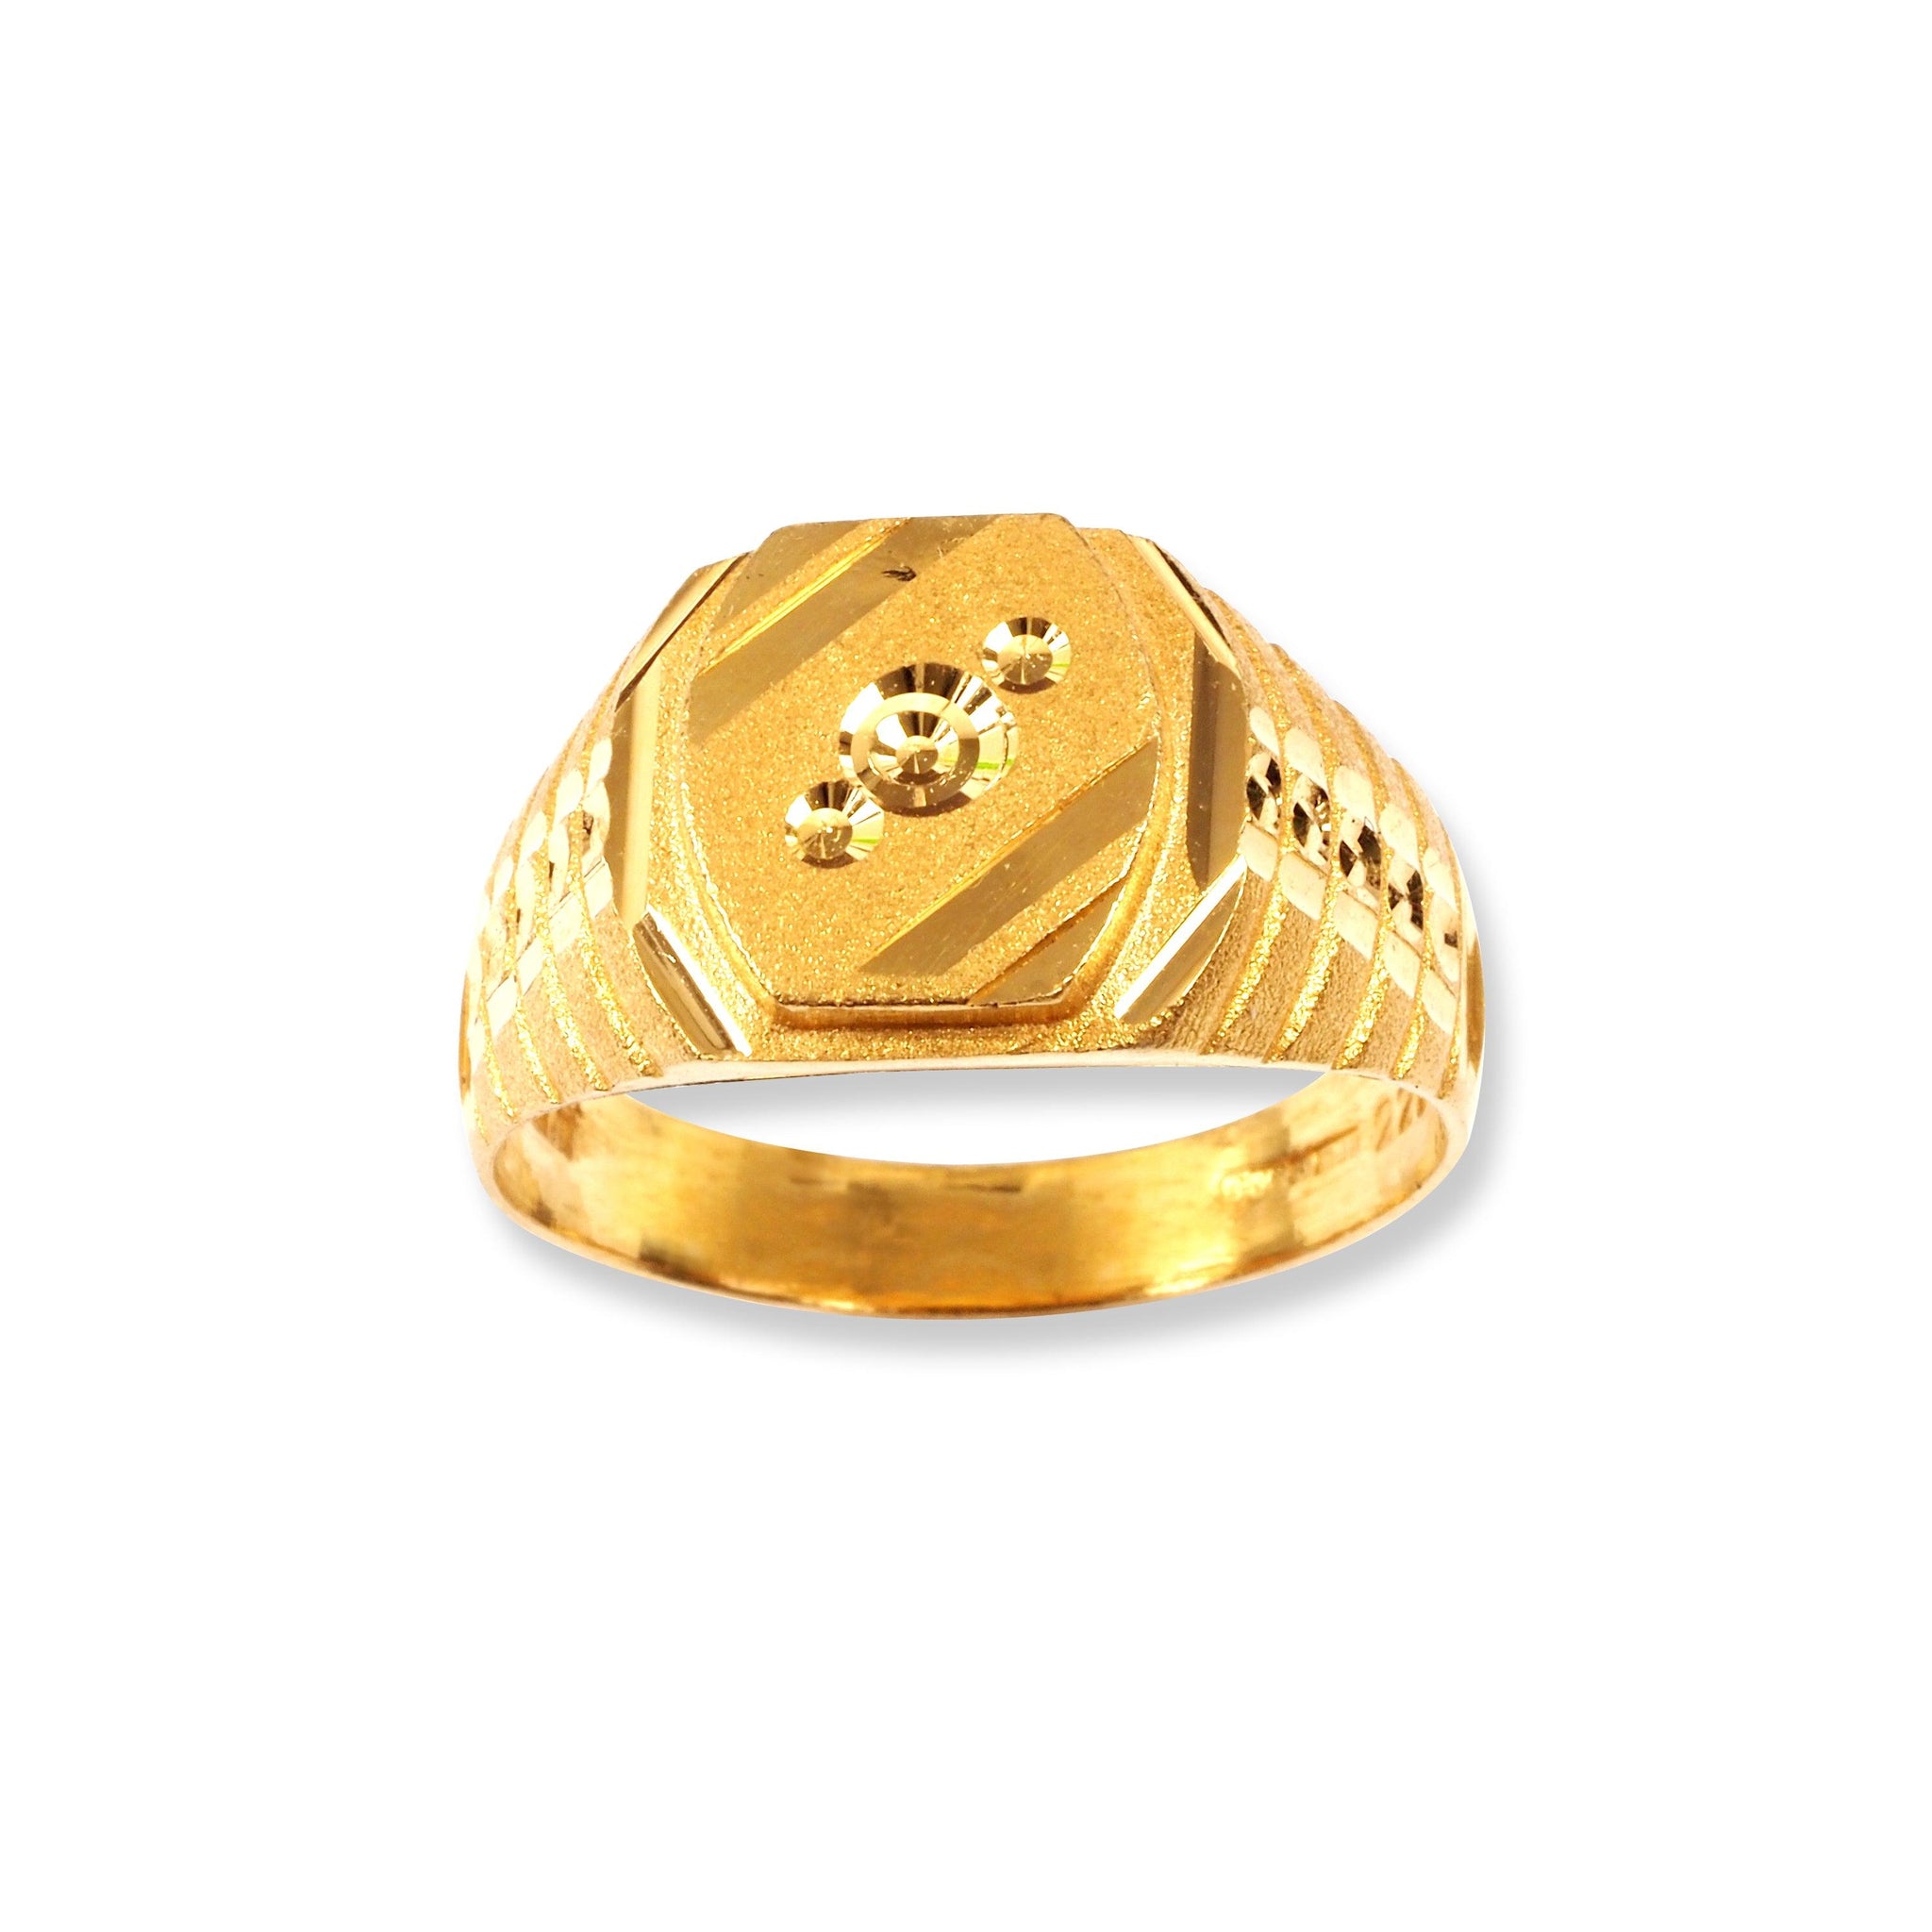 22ct Gold Gents Signet Ring GBR-8320